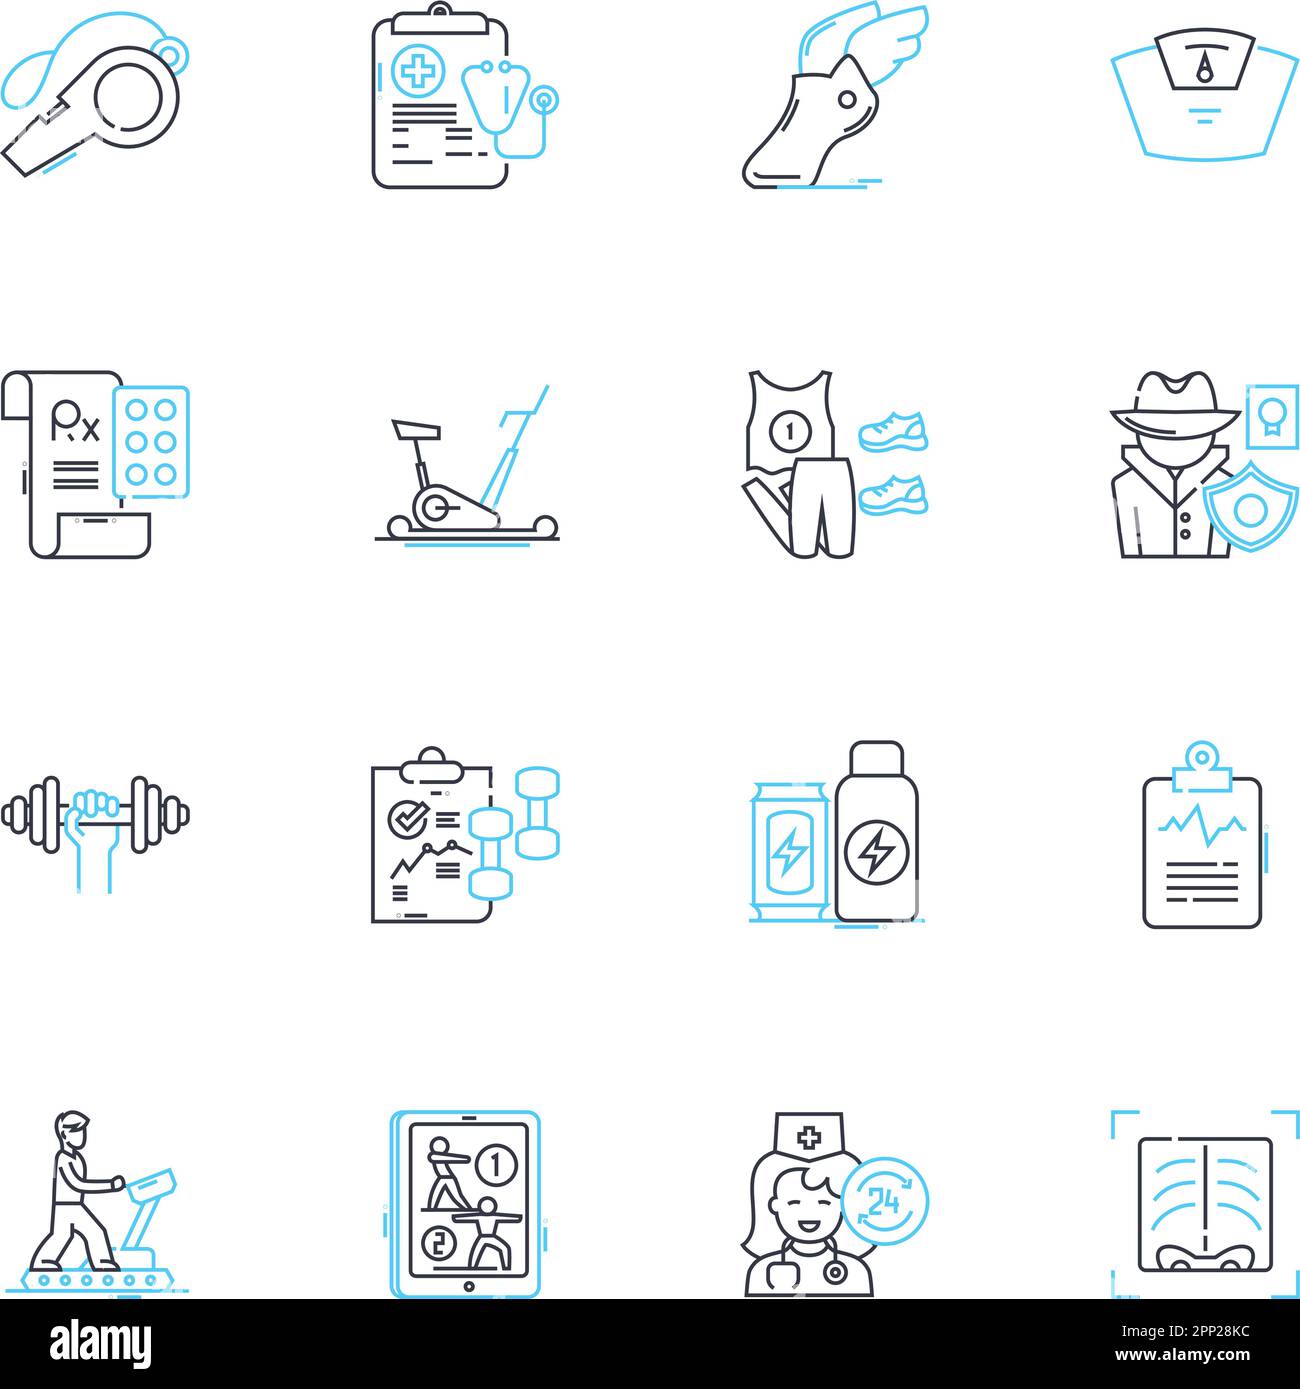 Sports medicine linear icons set. Treatment, Rehabilitation, Injury, Prevention, Physical therapy, Conditioning, Performance line vector and concept Stock Vector